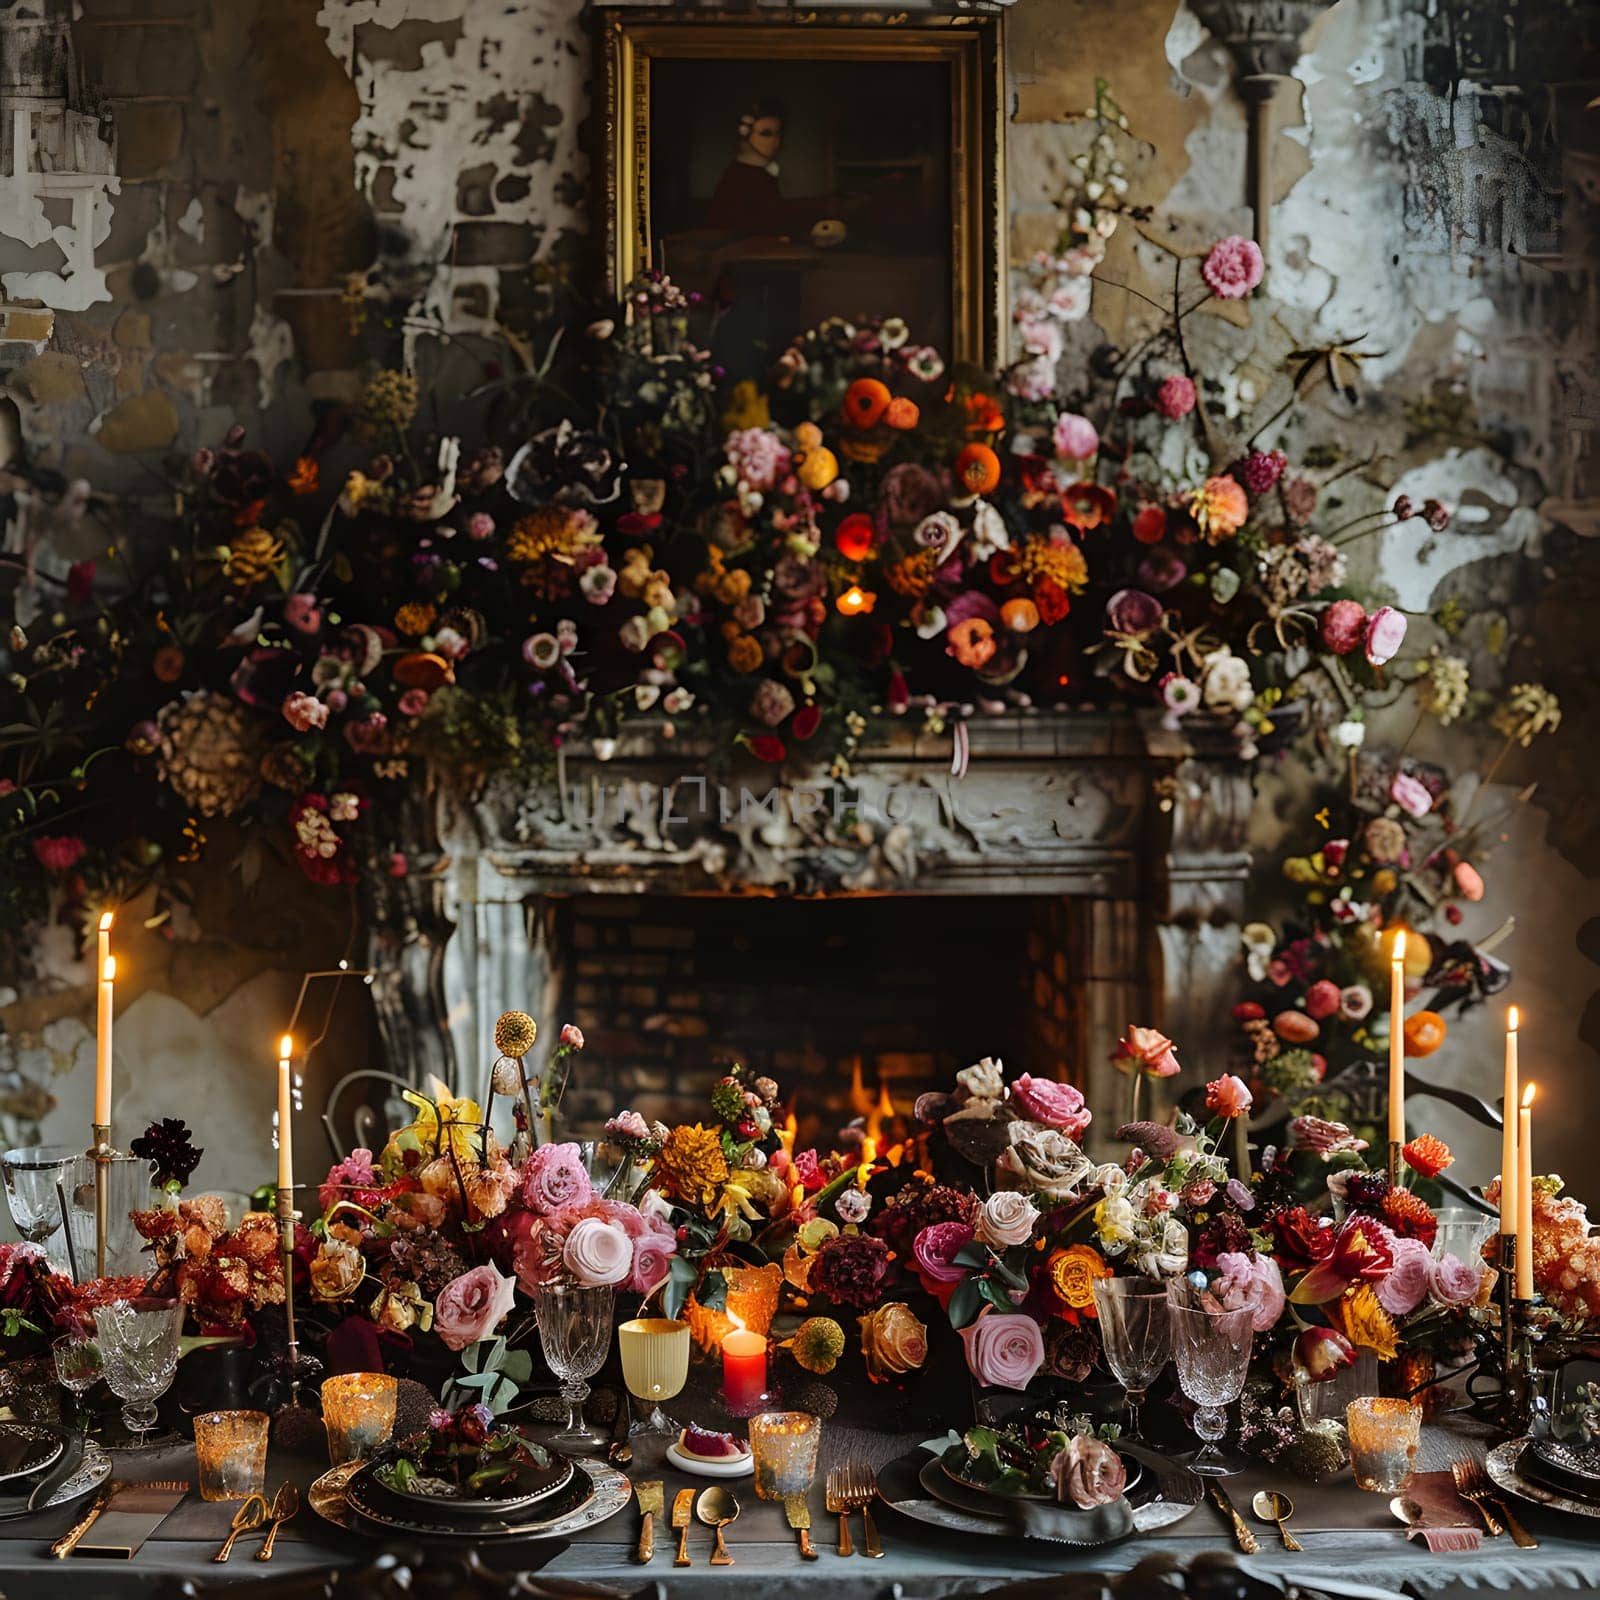 A beautifully decorated table with plates, candles, and flowers is set in front of a cozy fireplace, creating a festive and inviting atmosphere for a Christmas event